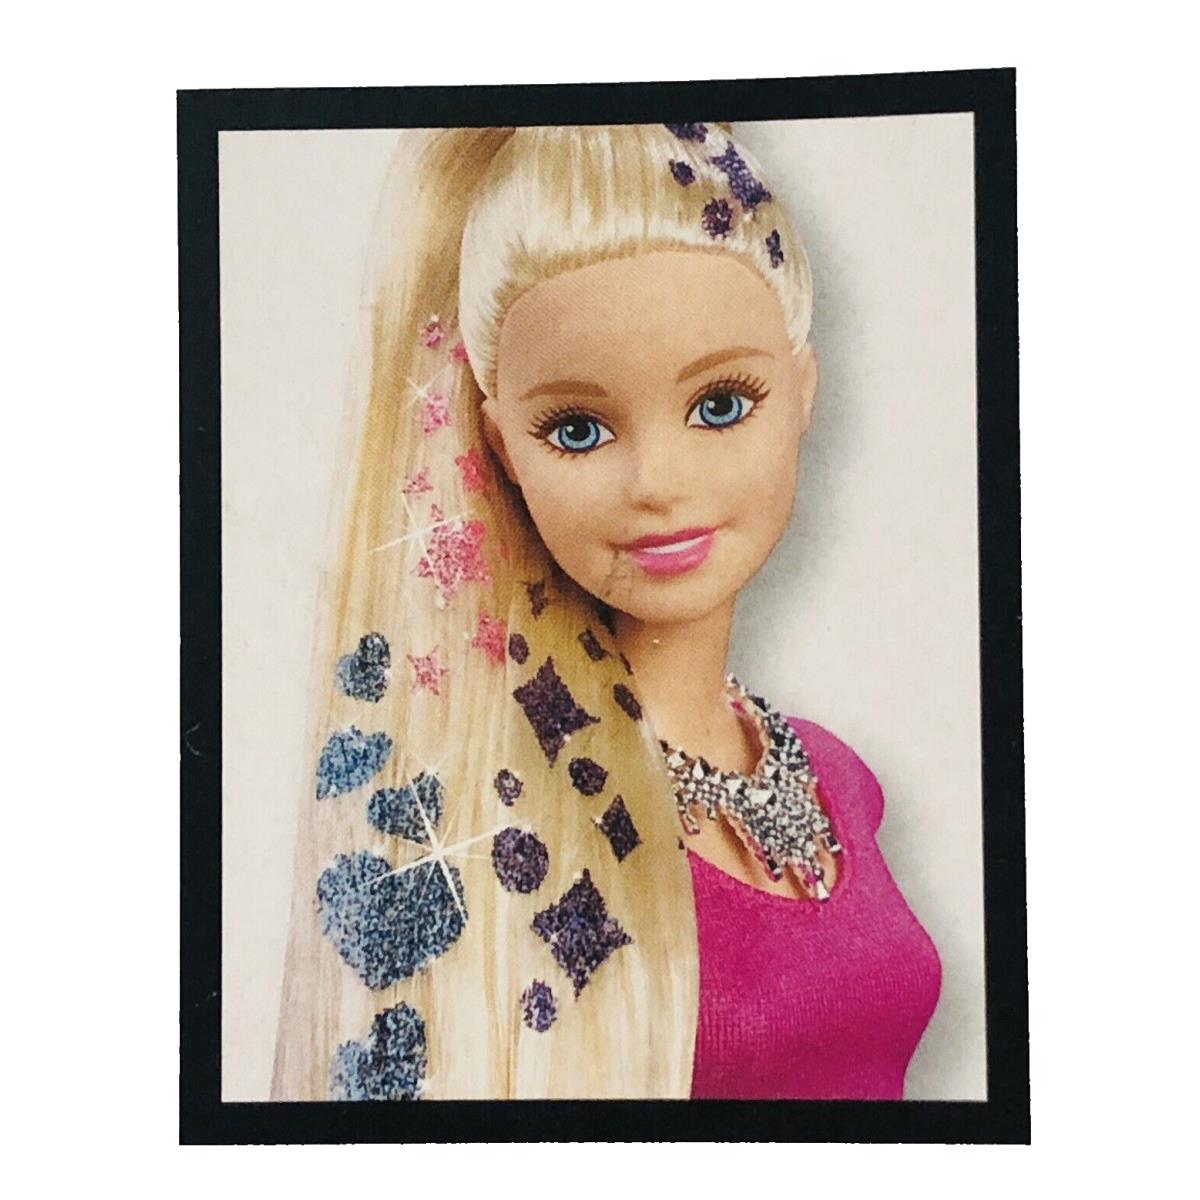 Mattel 2014 Barbie Glitter Hair Design 11 Fashion Doll with Styling Accessories